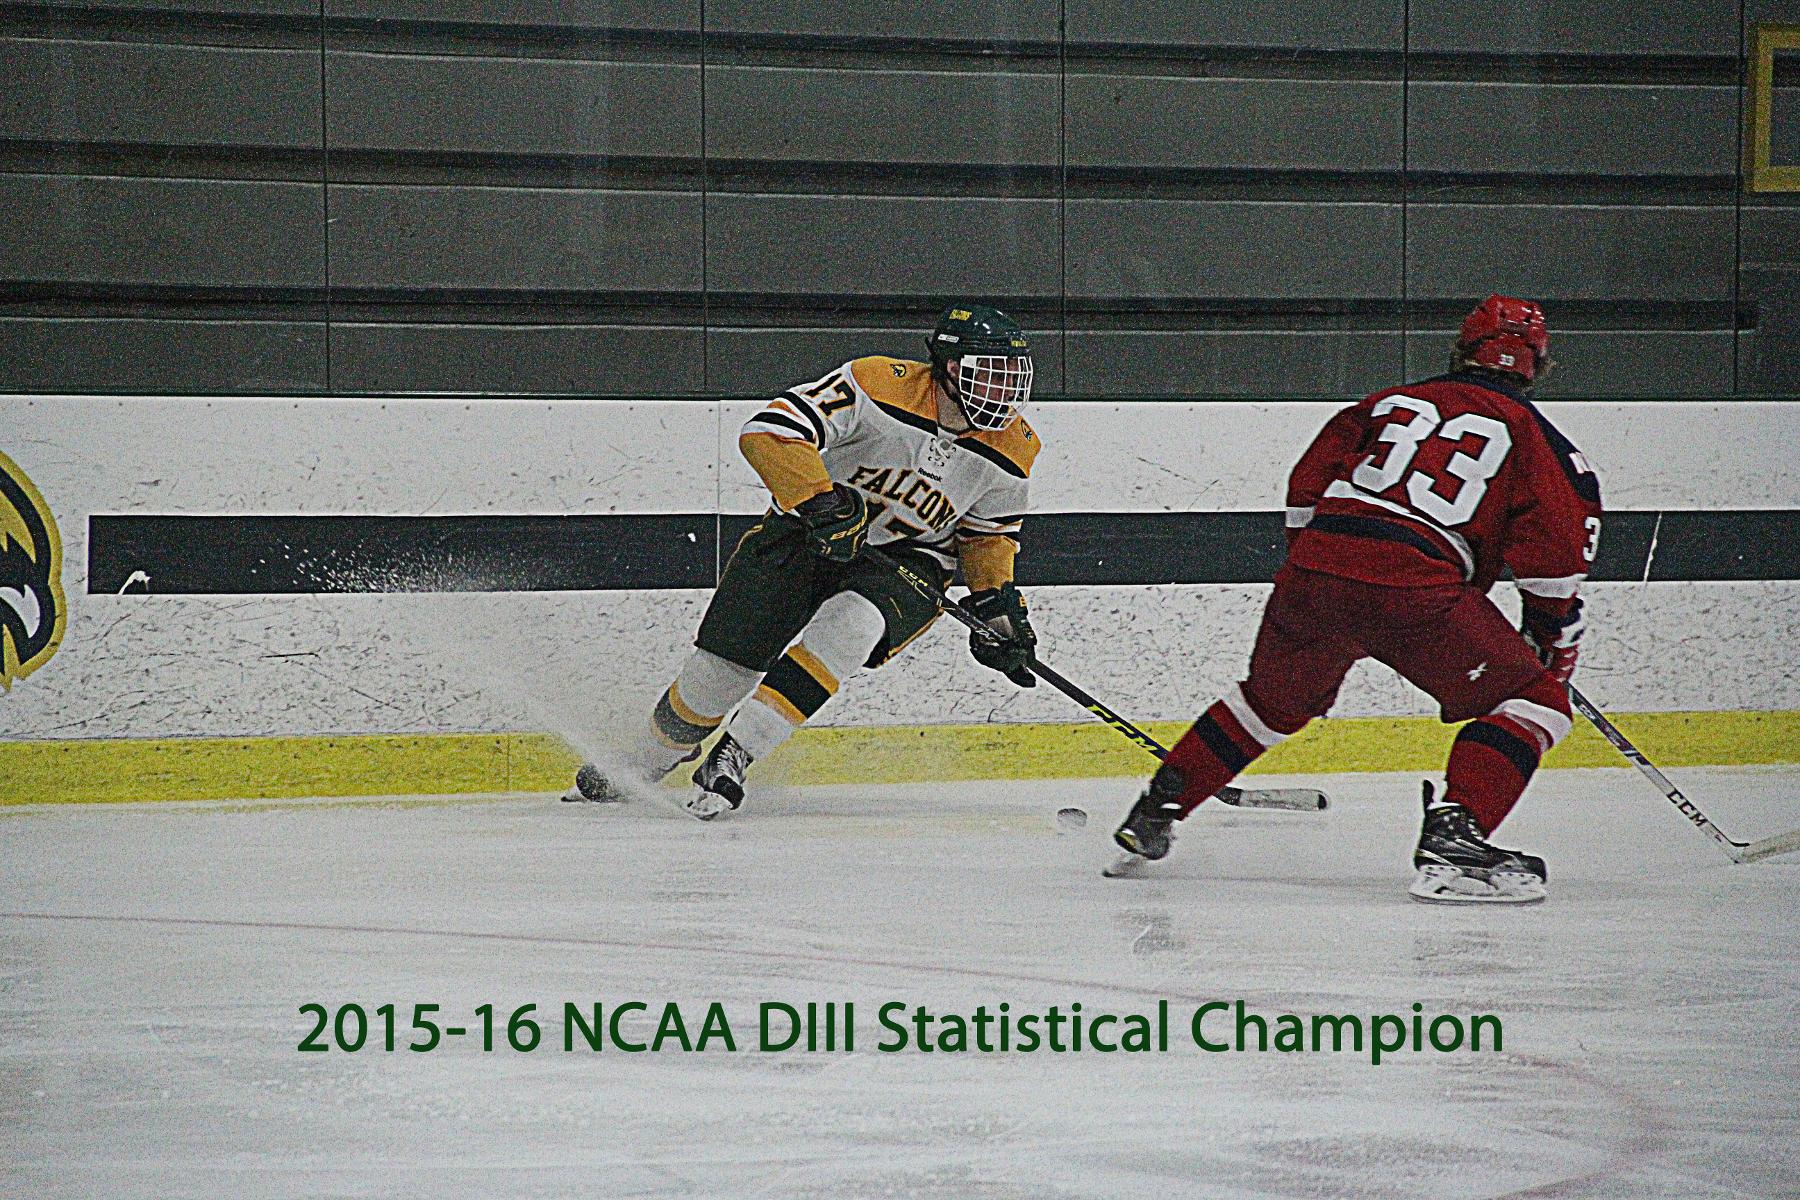 Connolly Tabbed NCAA DIII Statistical Champion